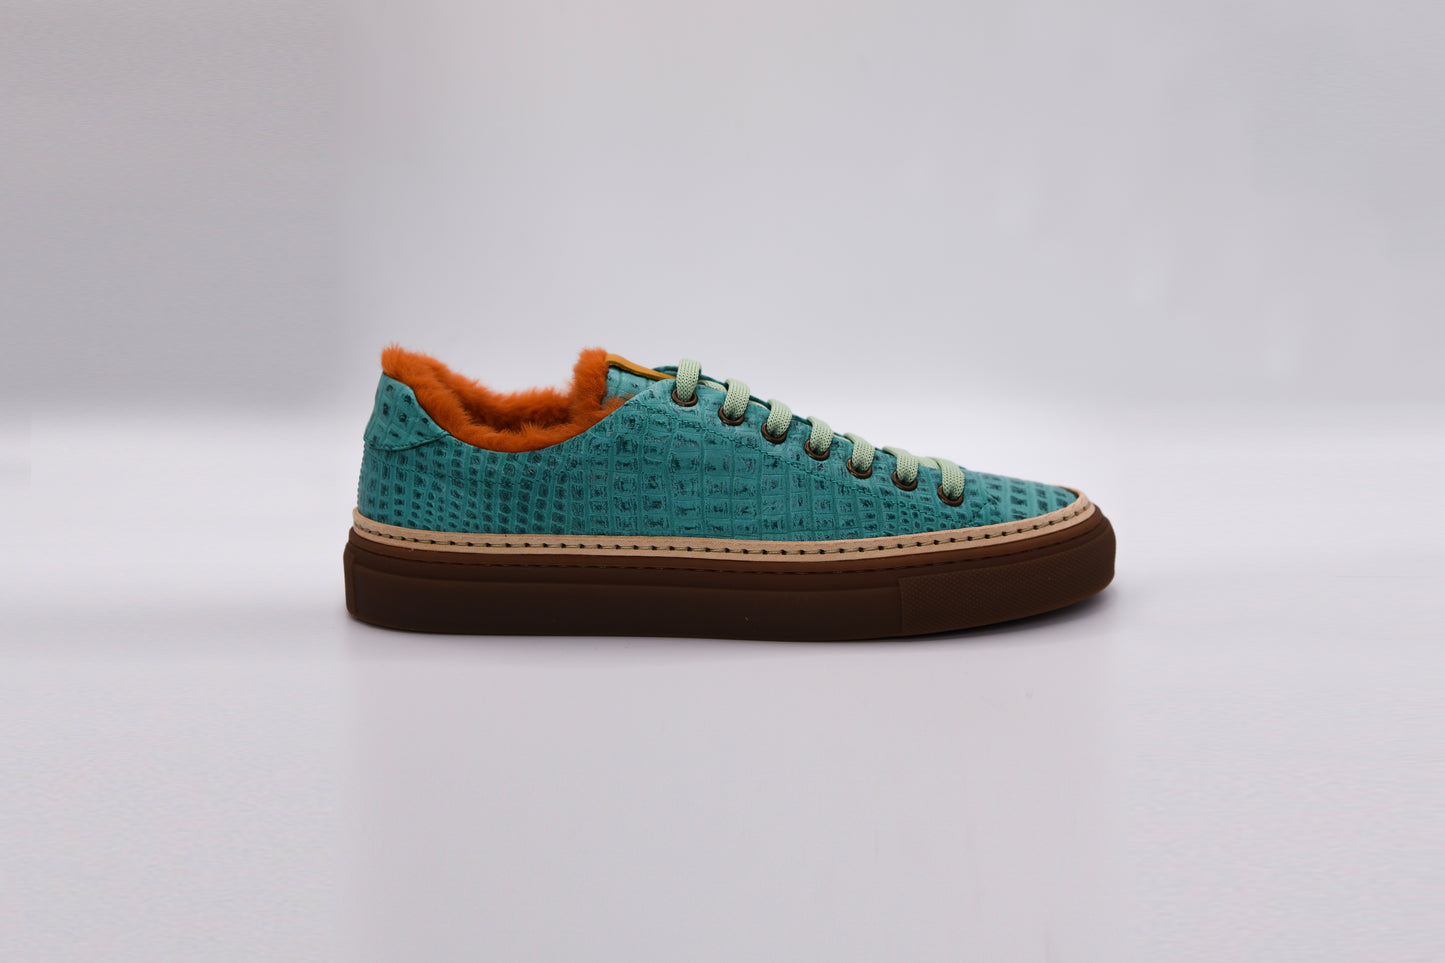 Women’s Mint Leather Sneakers with Tan Eco-Fur